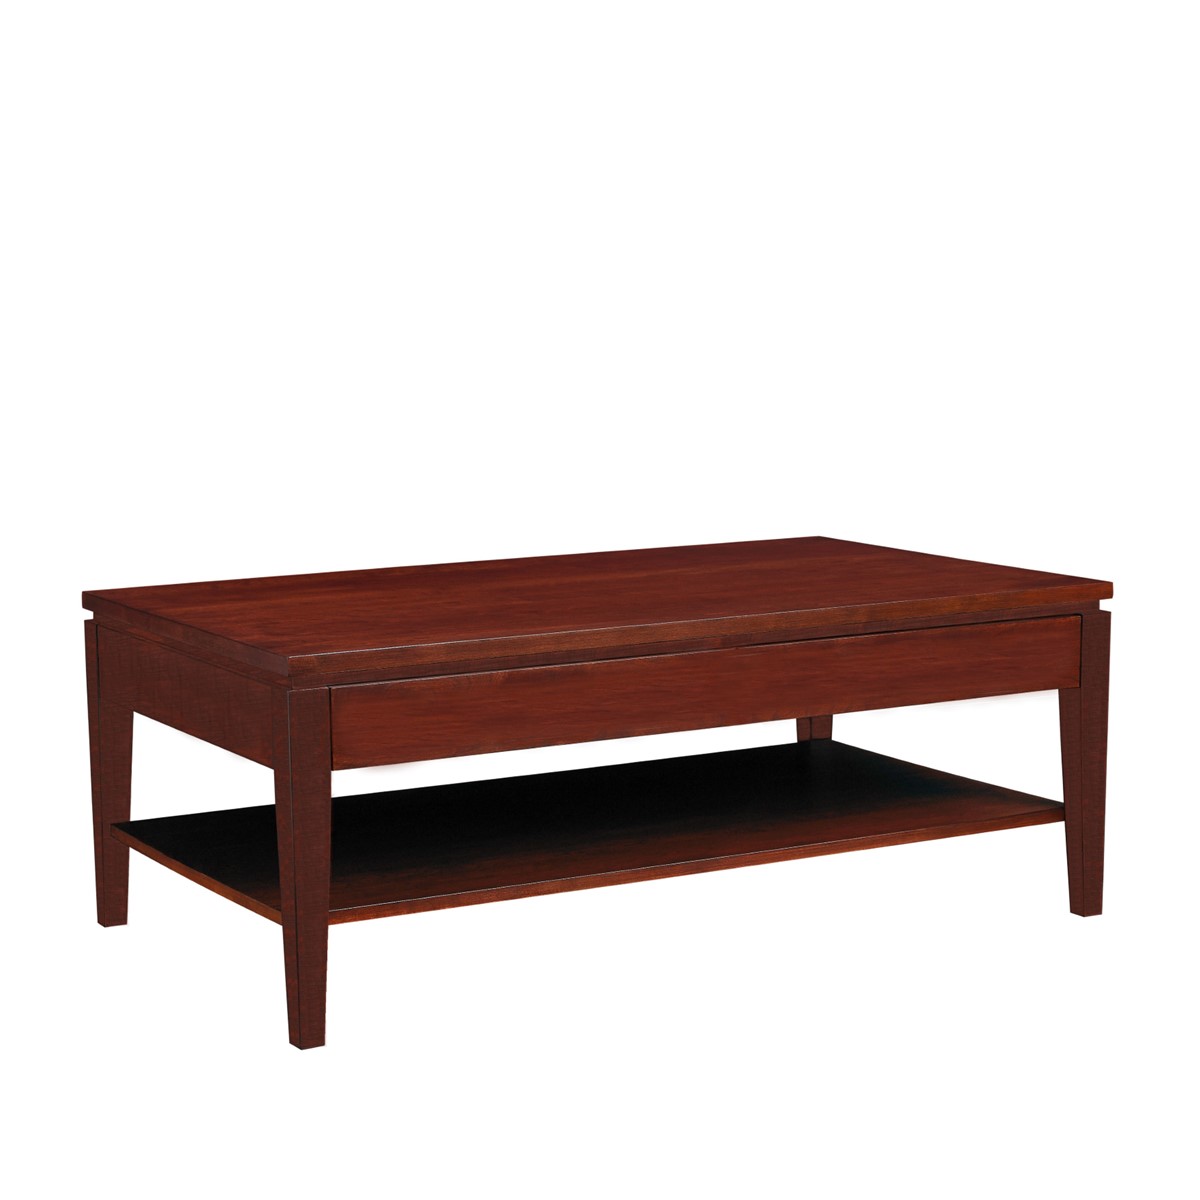 Urban Expressions: Rectangular Coffee Table with Shelf